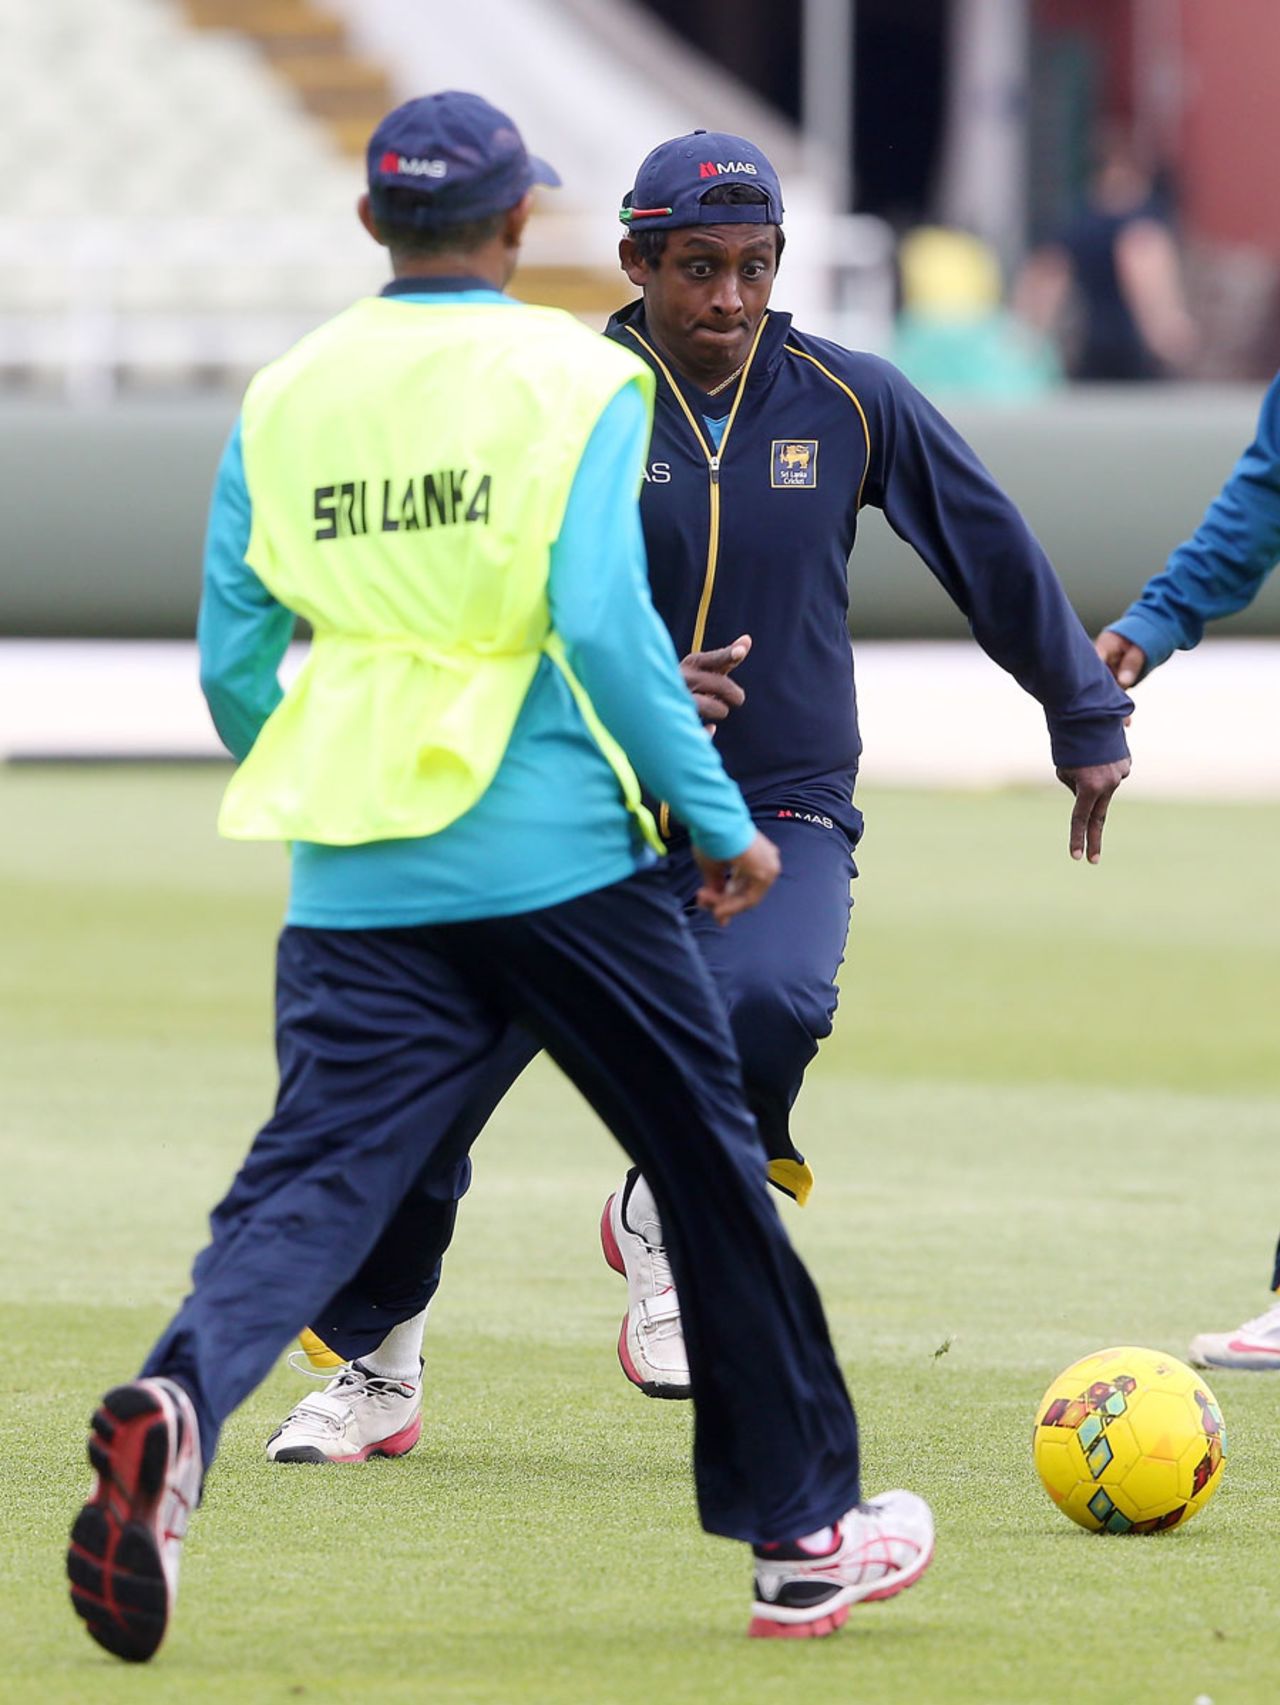 Ajantha Mendis shows off a different kind of footwork, Edgbaston, June 2, 2014